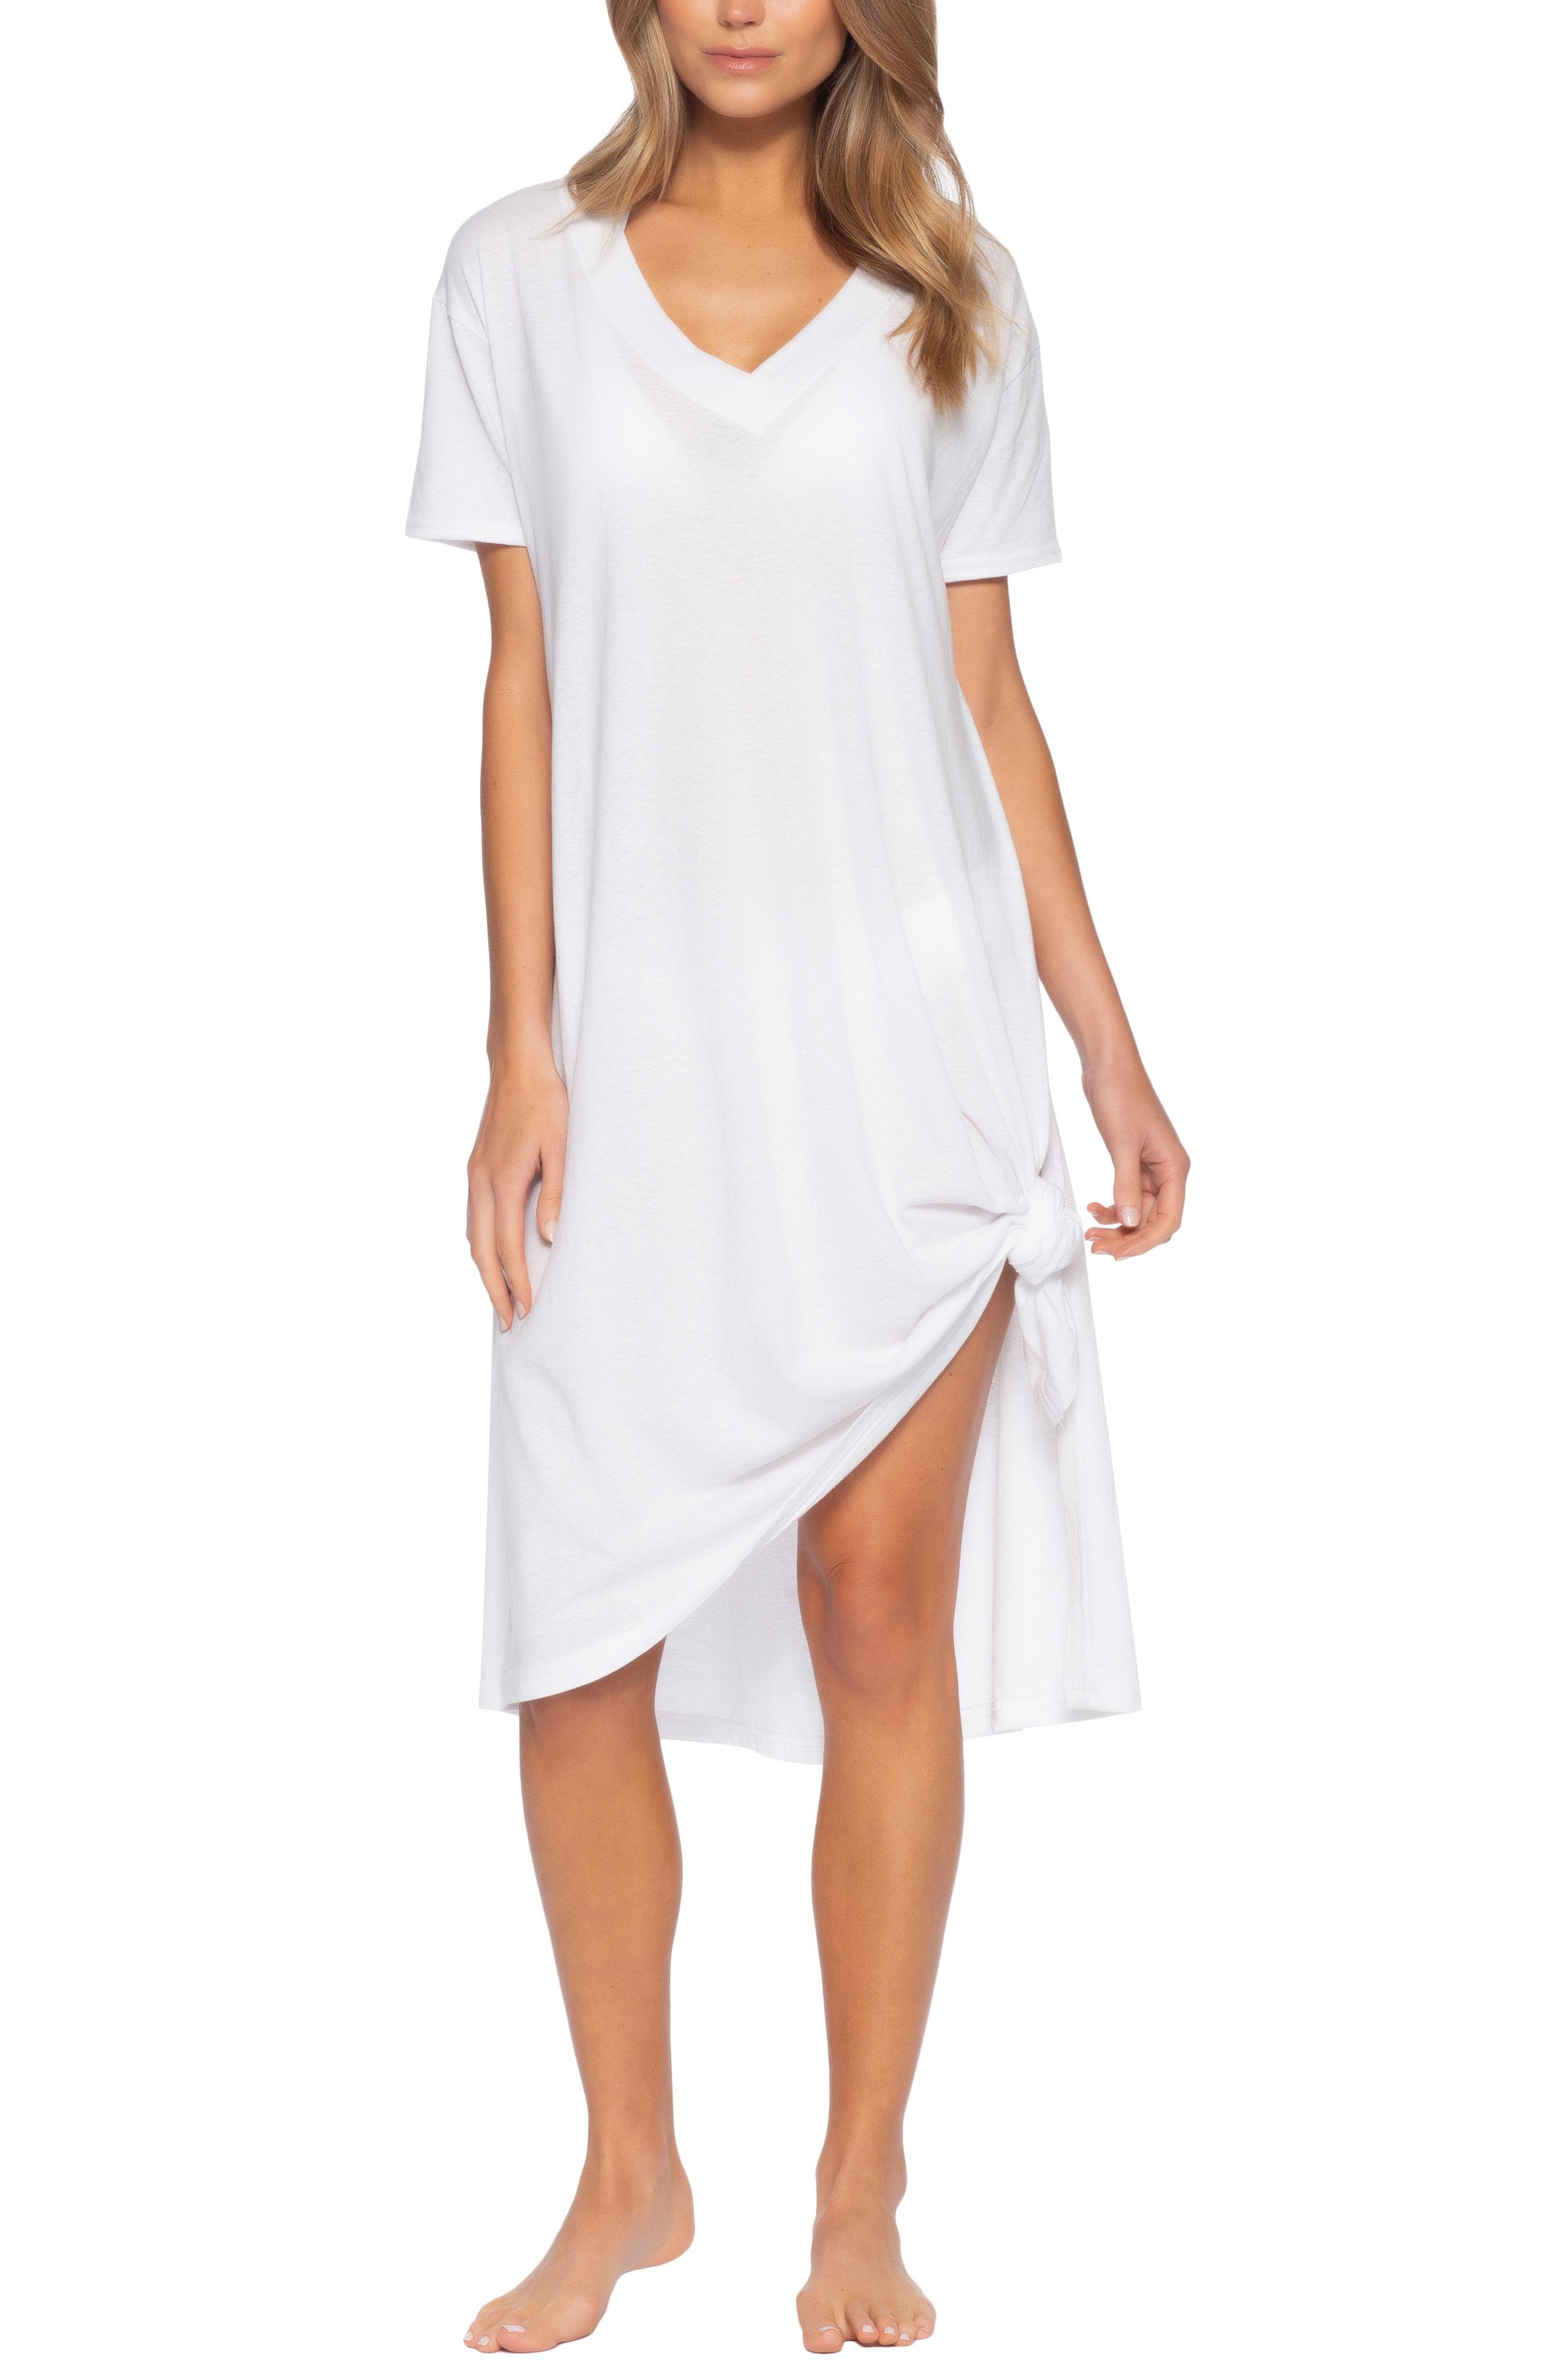 Becca Cotton Beach Date Cover-up T-shirt Dress in White - Lyst